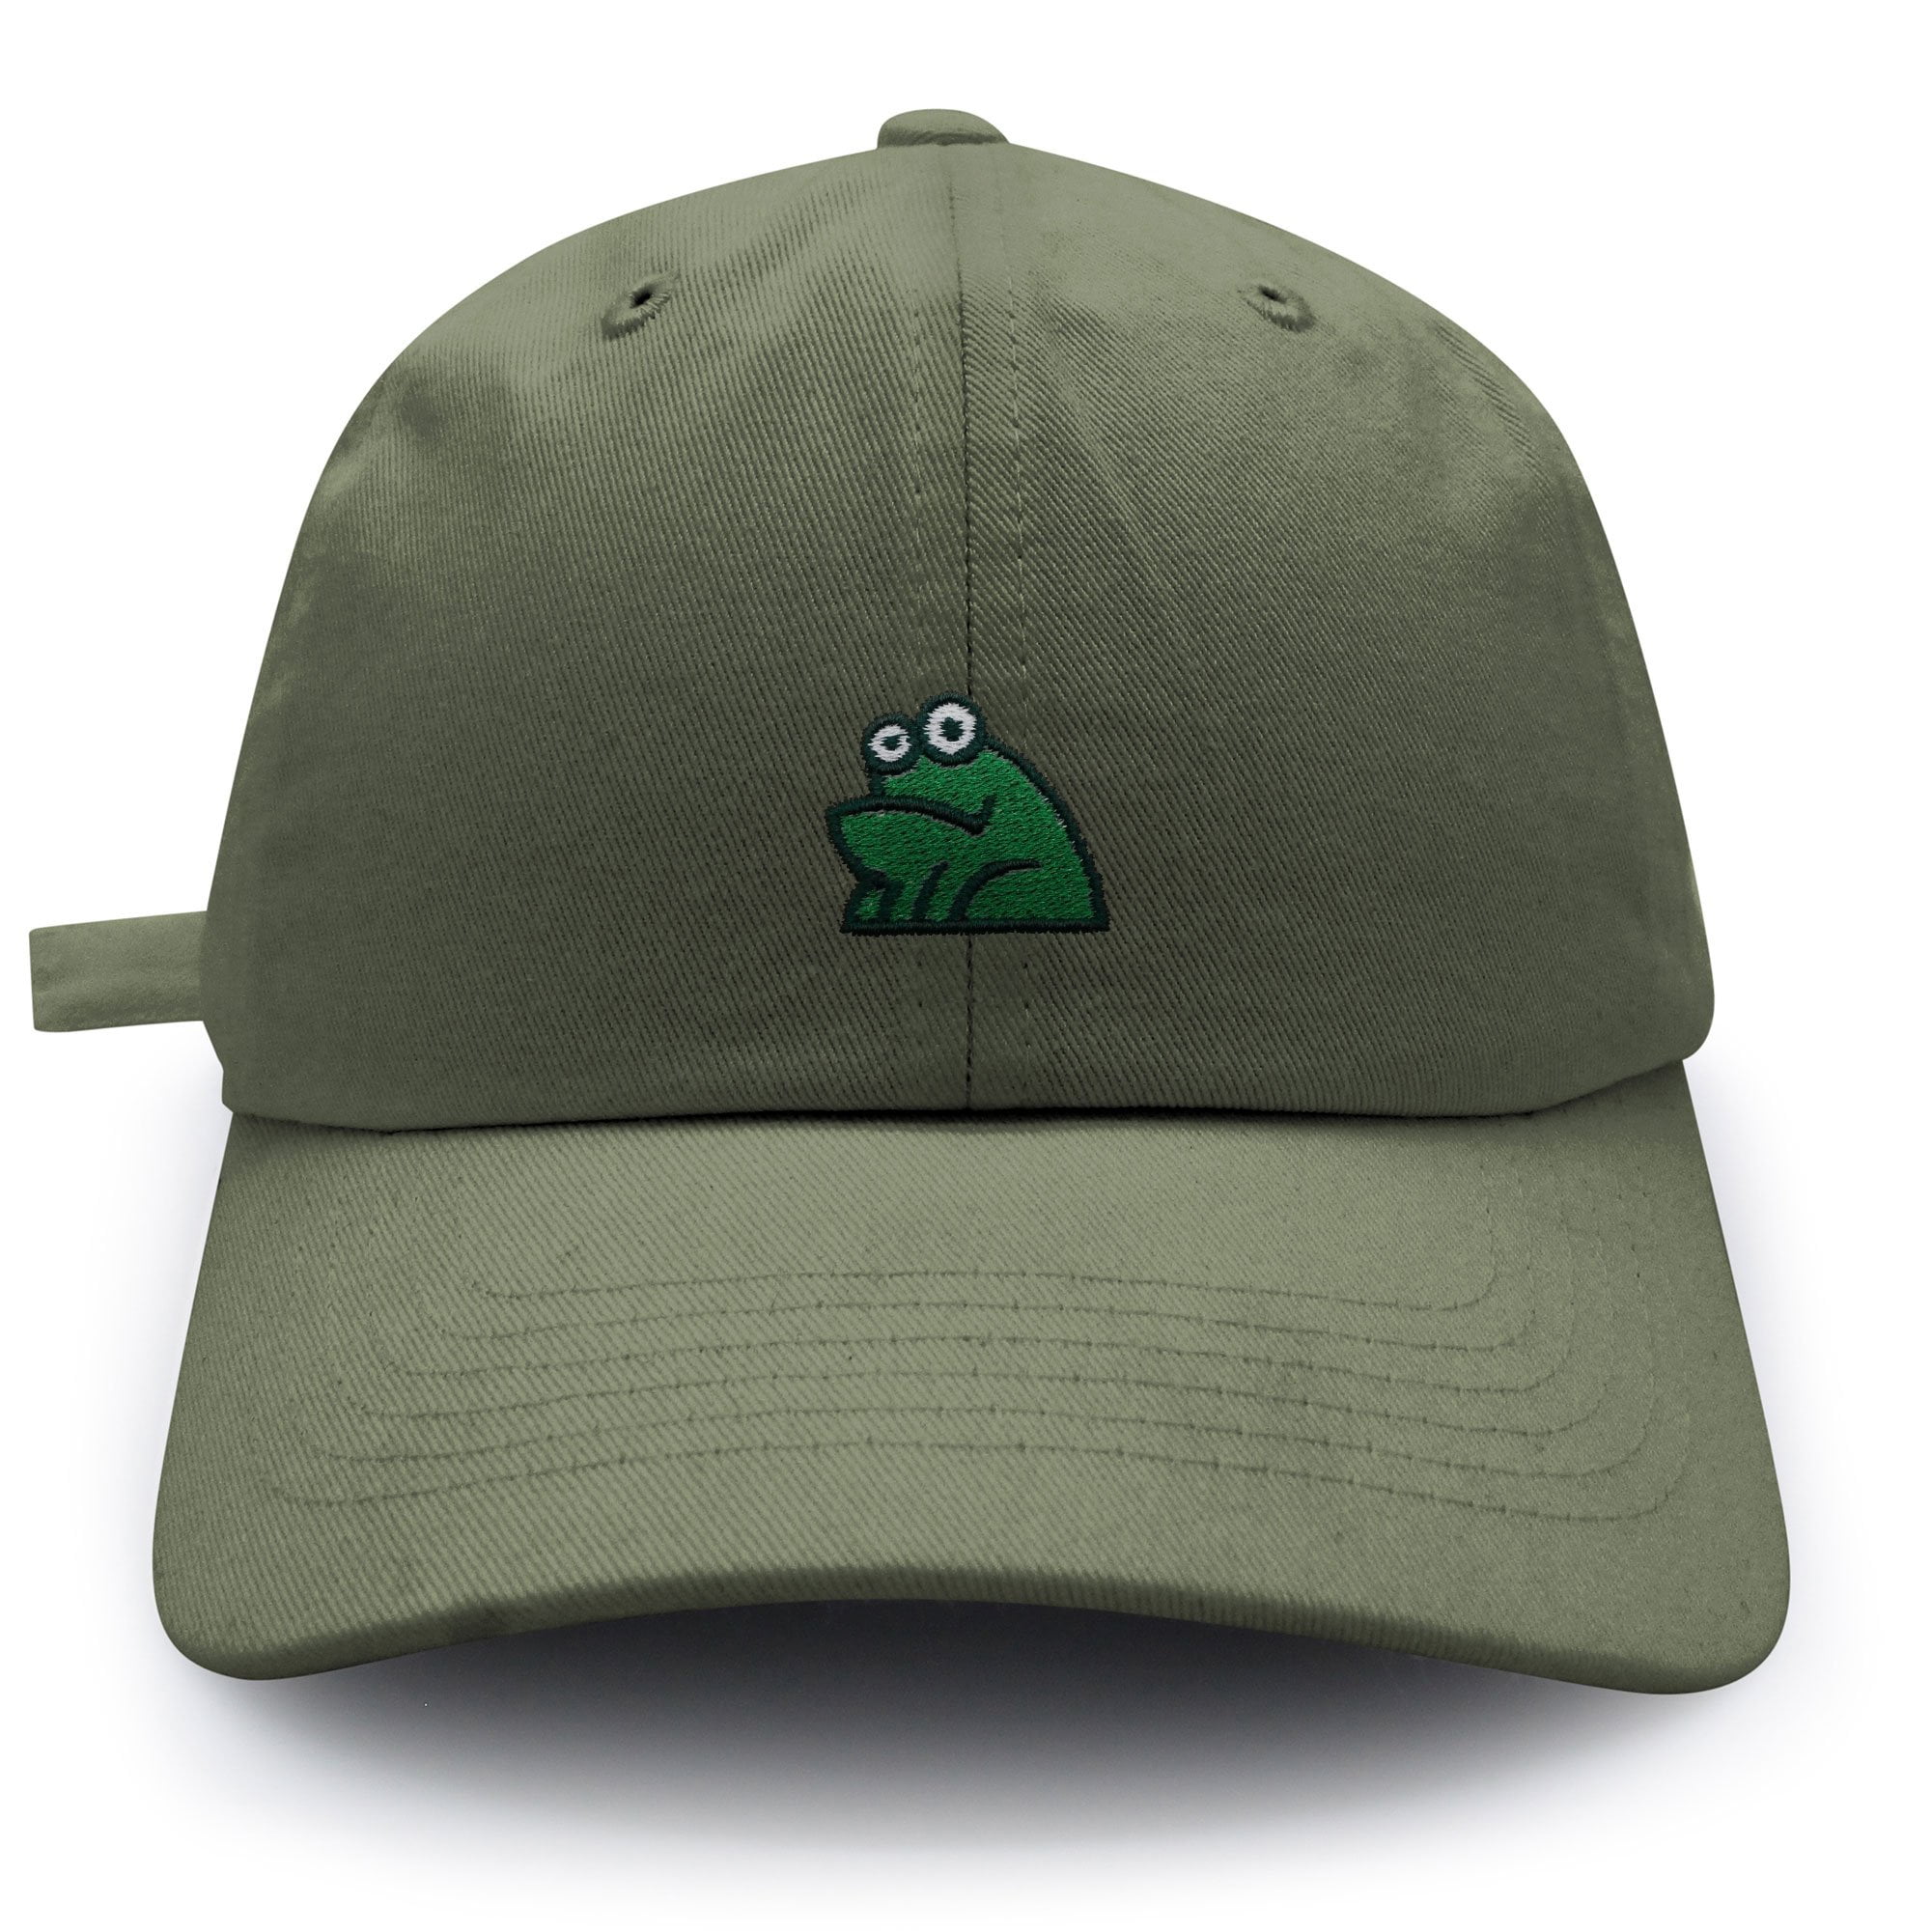 Funny Dinosaurs Classic Style Baseball Cap All Cotton Made Adjustable Fits Men Women Low Profile Hat